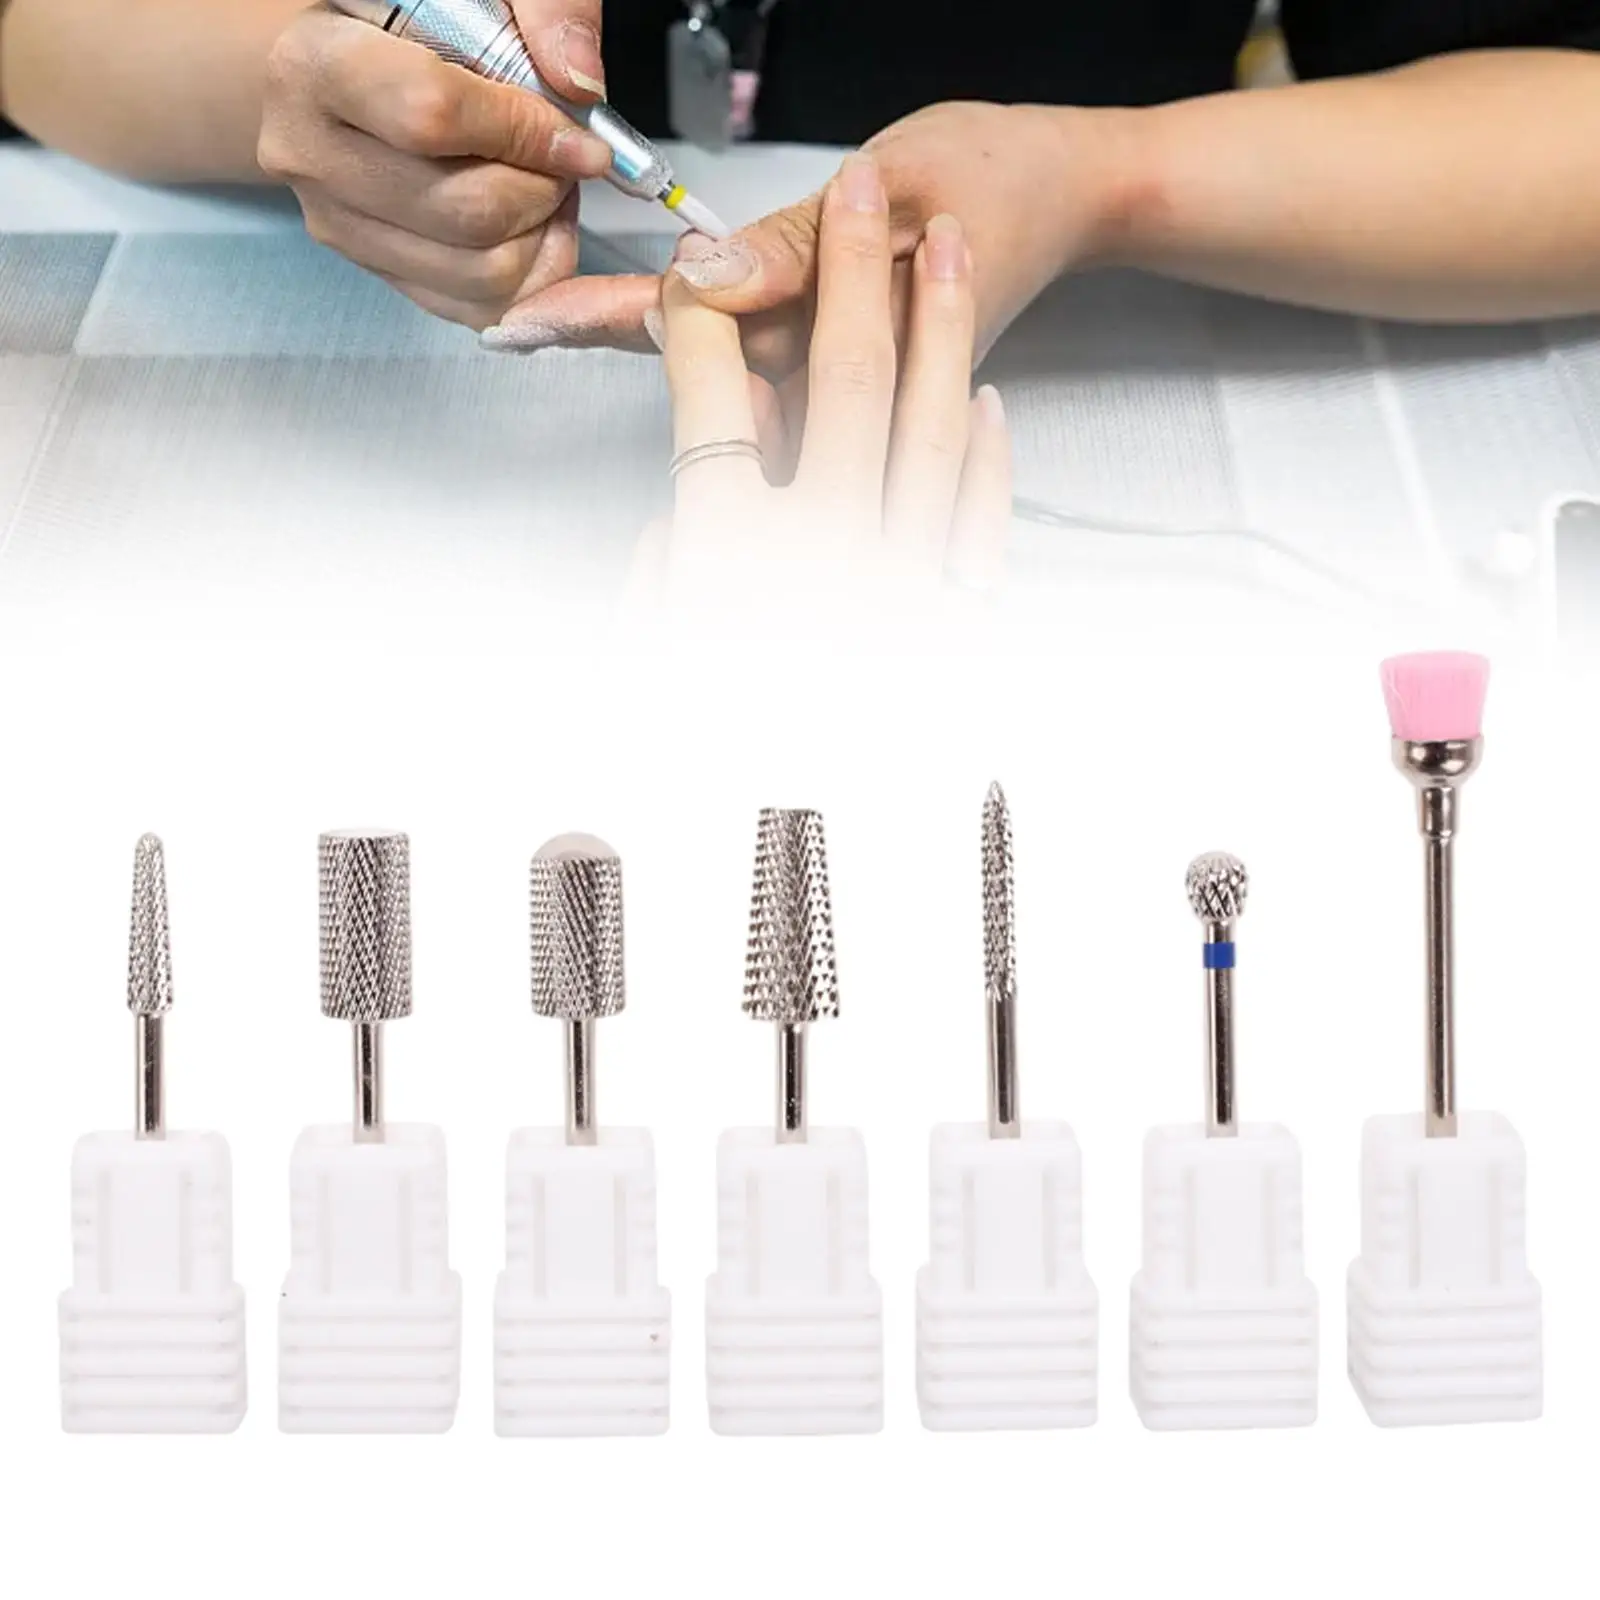 7 Pieces Nail Bits Nail Accessories Tool Electric Manicure Head Replacement Device Pedicure Electric Nail Filing Bit Heads